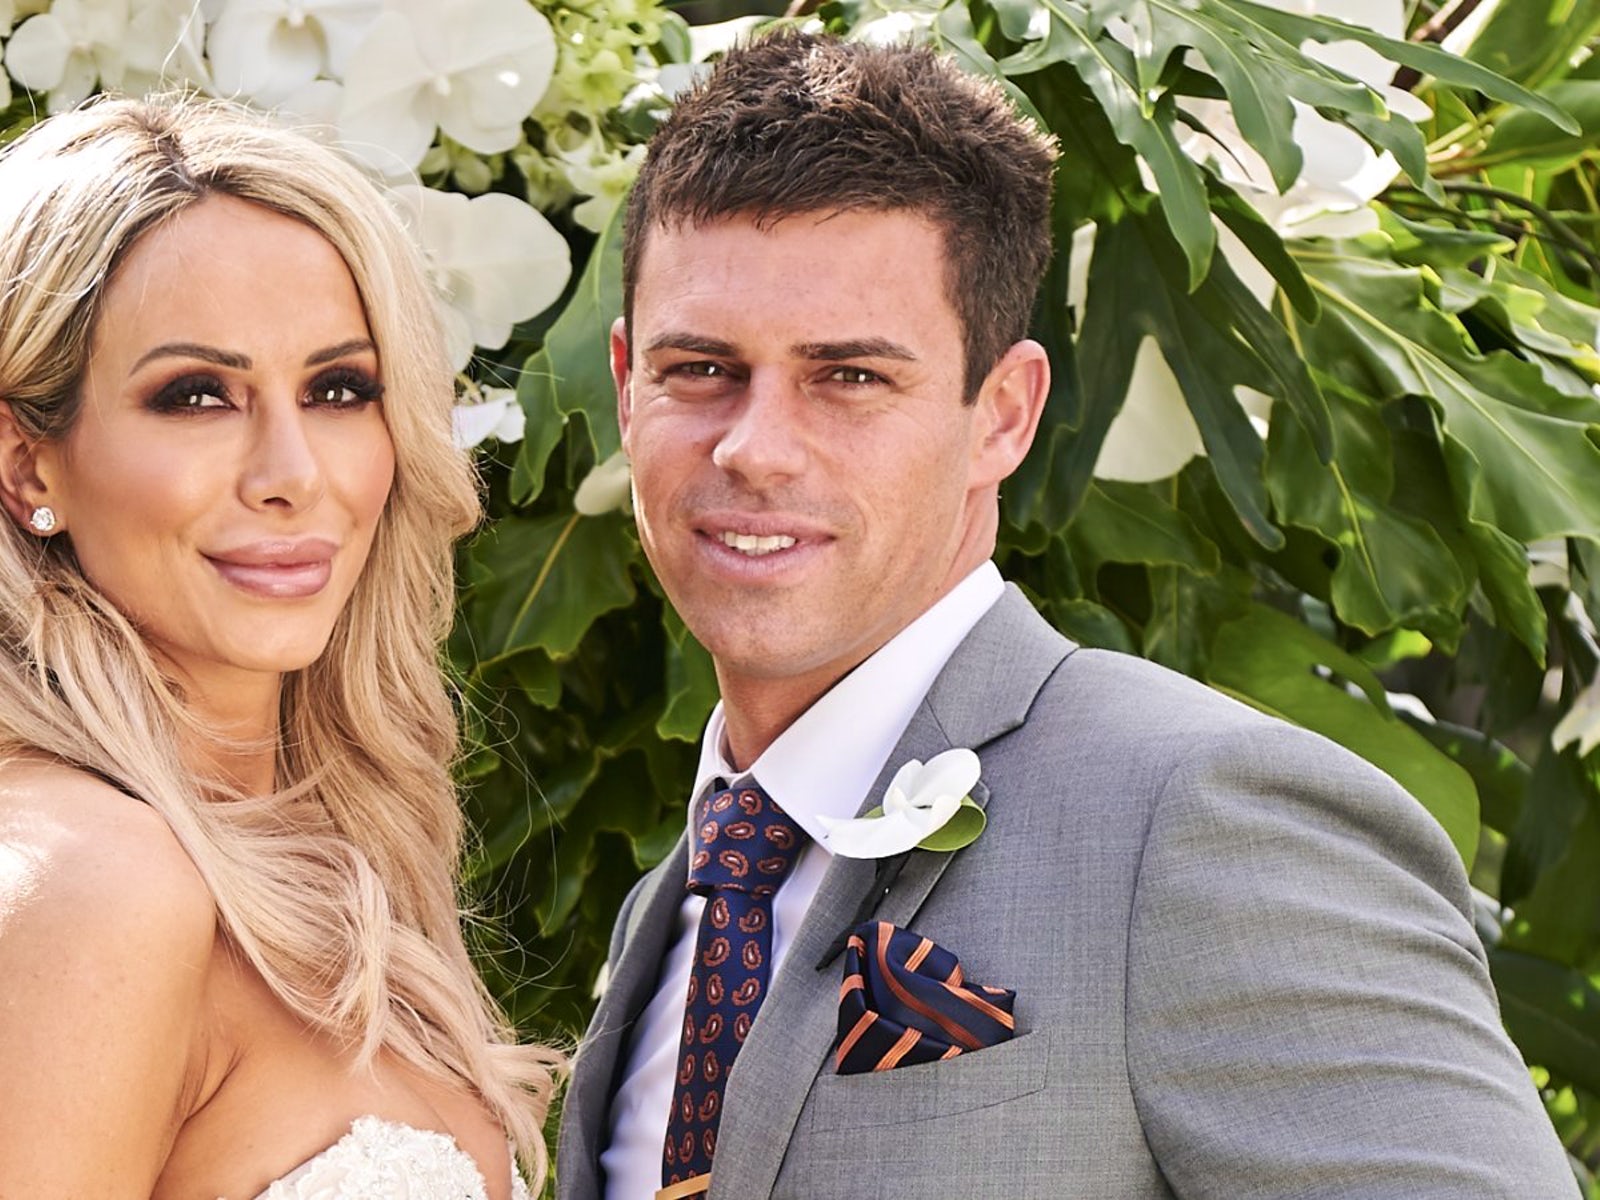 'Married at First Sight: Australia' Season 7 to air on Lifetime - New Series Of Married At First Sight Australia